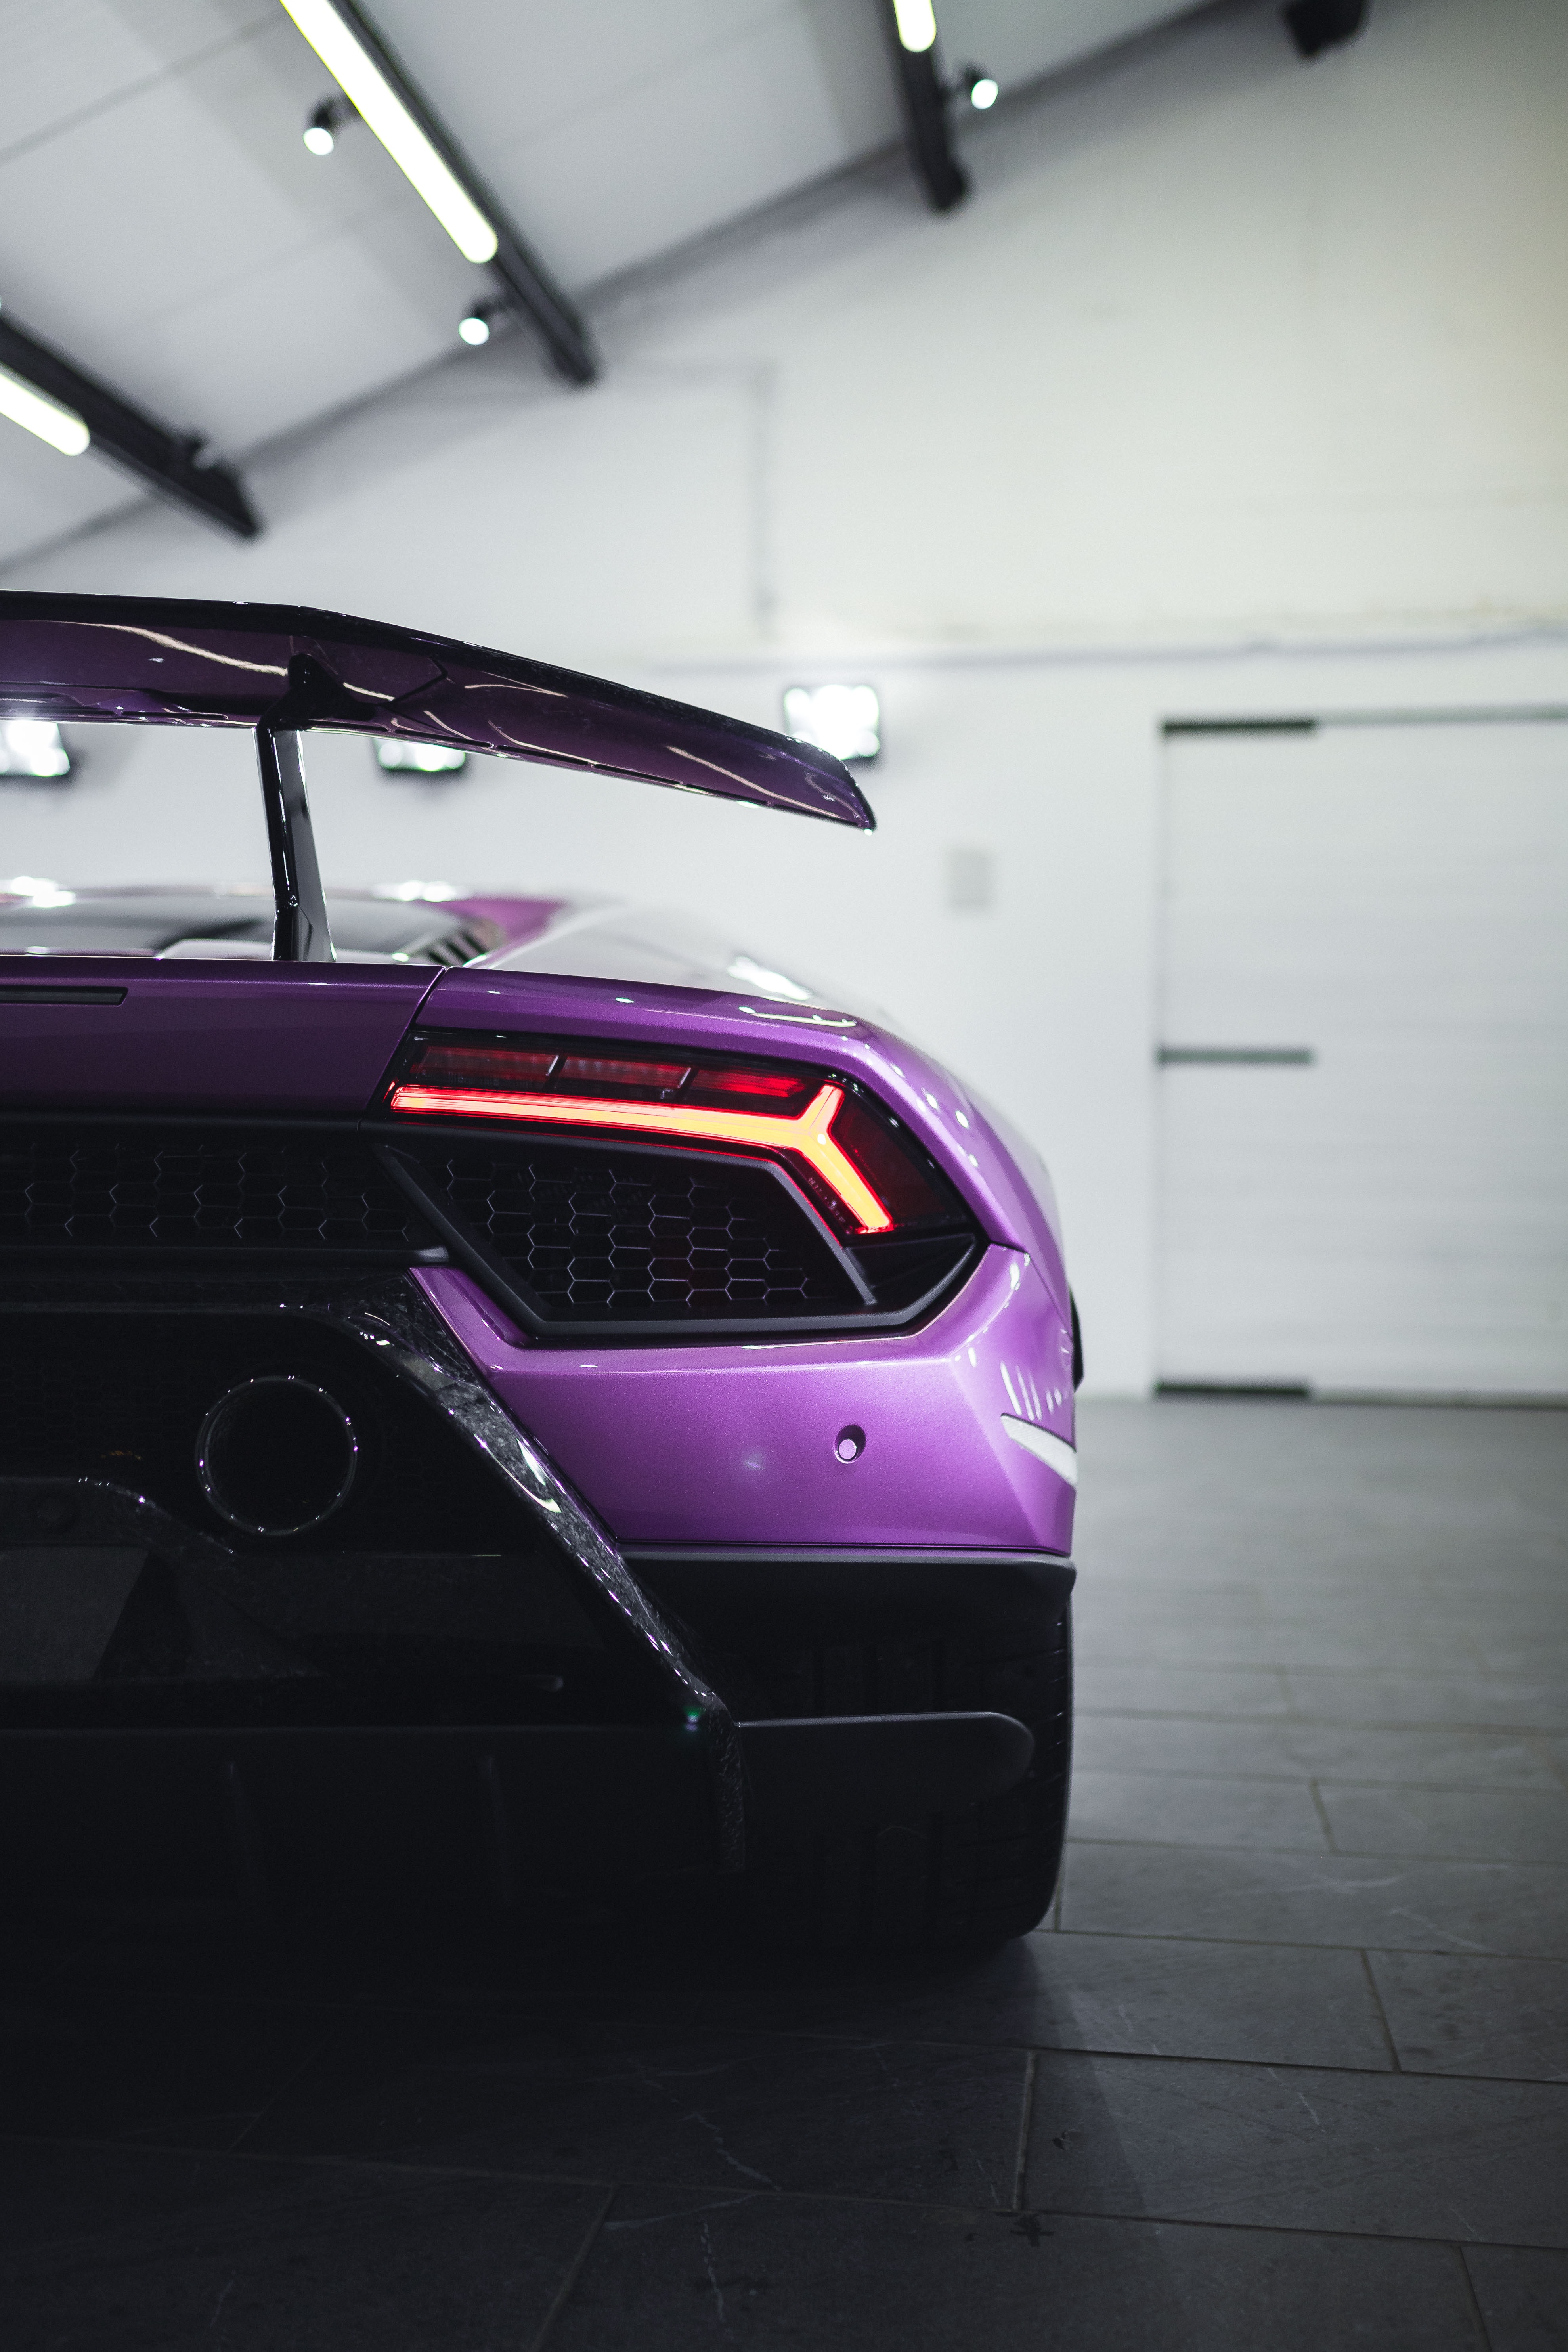 124634 download wallpaper purple, sports, lamborghini, violet, cars, car, sports car, back view, rear view, supercar screensavers and pictures for free